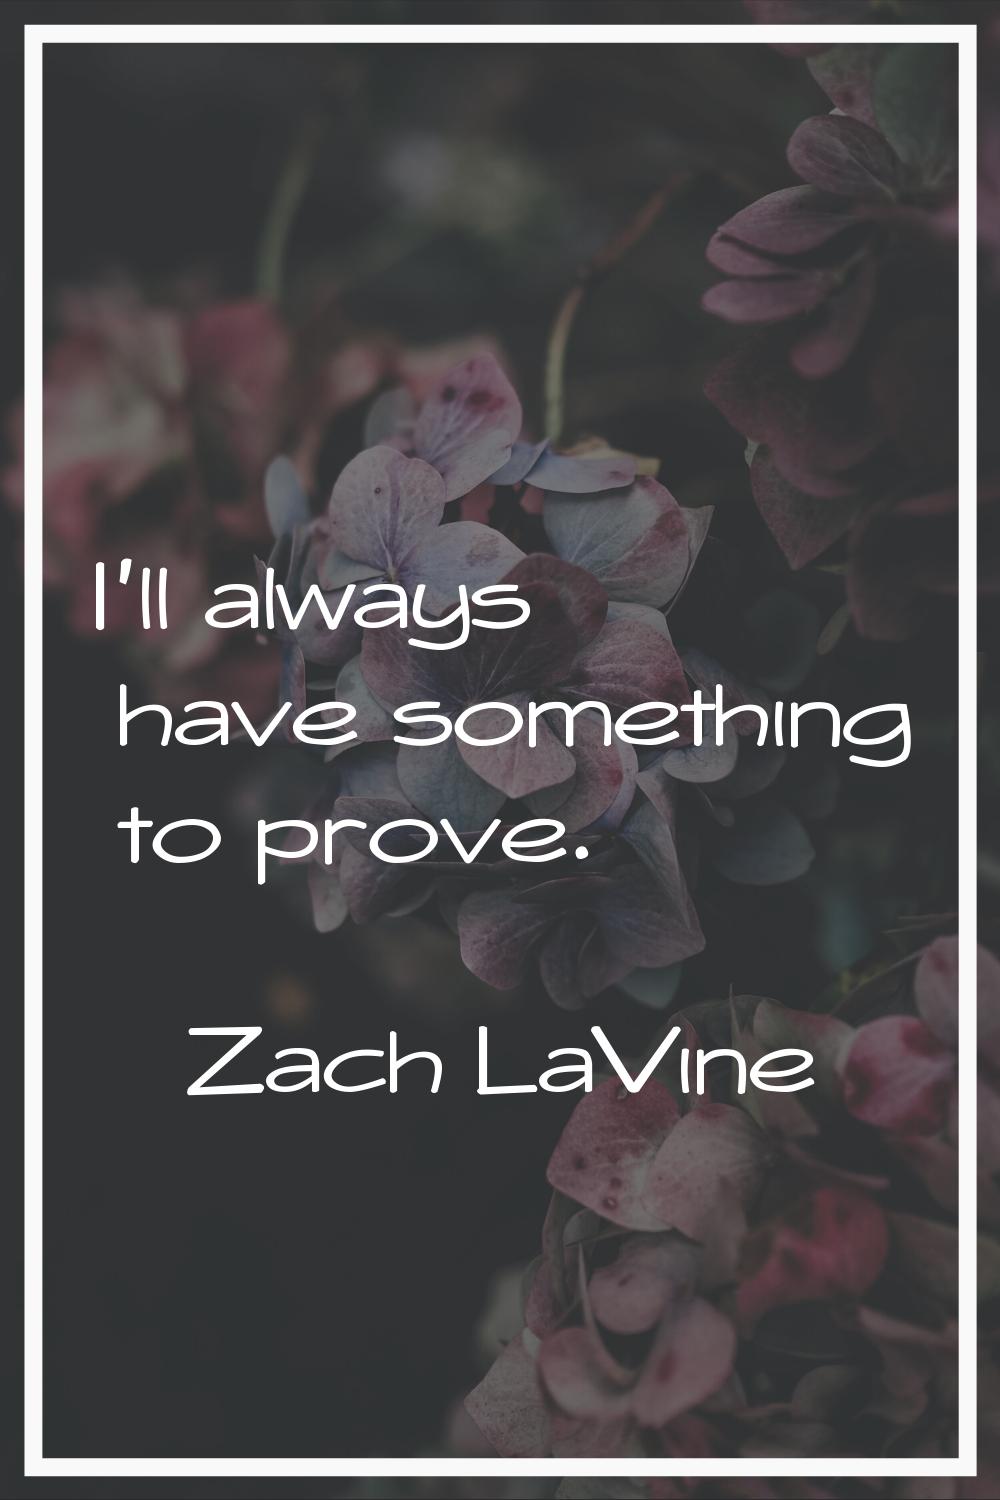 I'll always have something to prove.